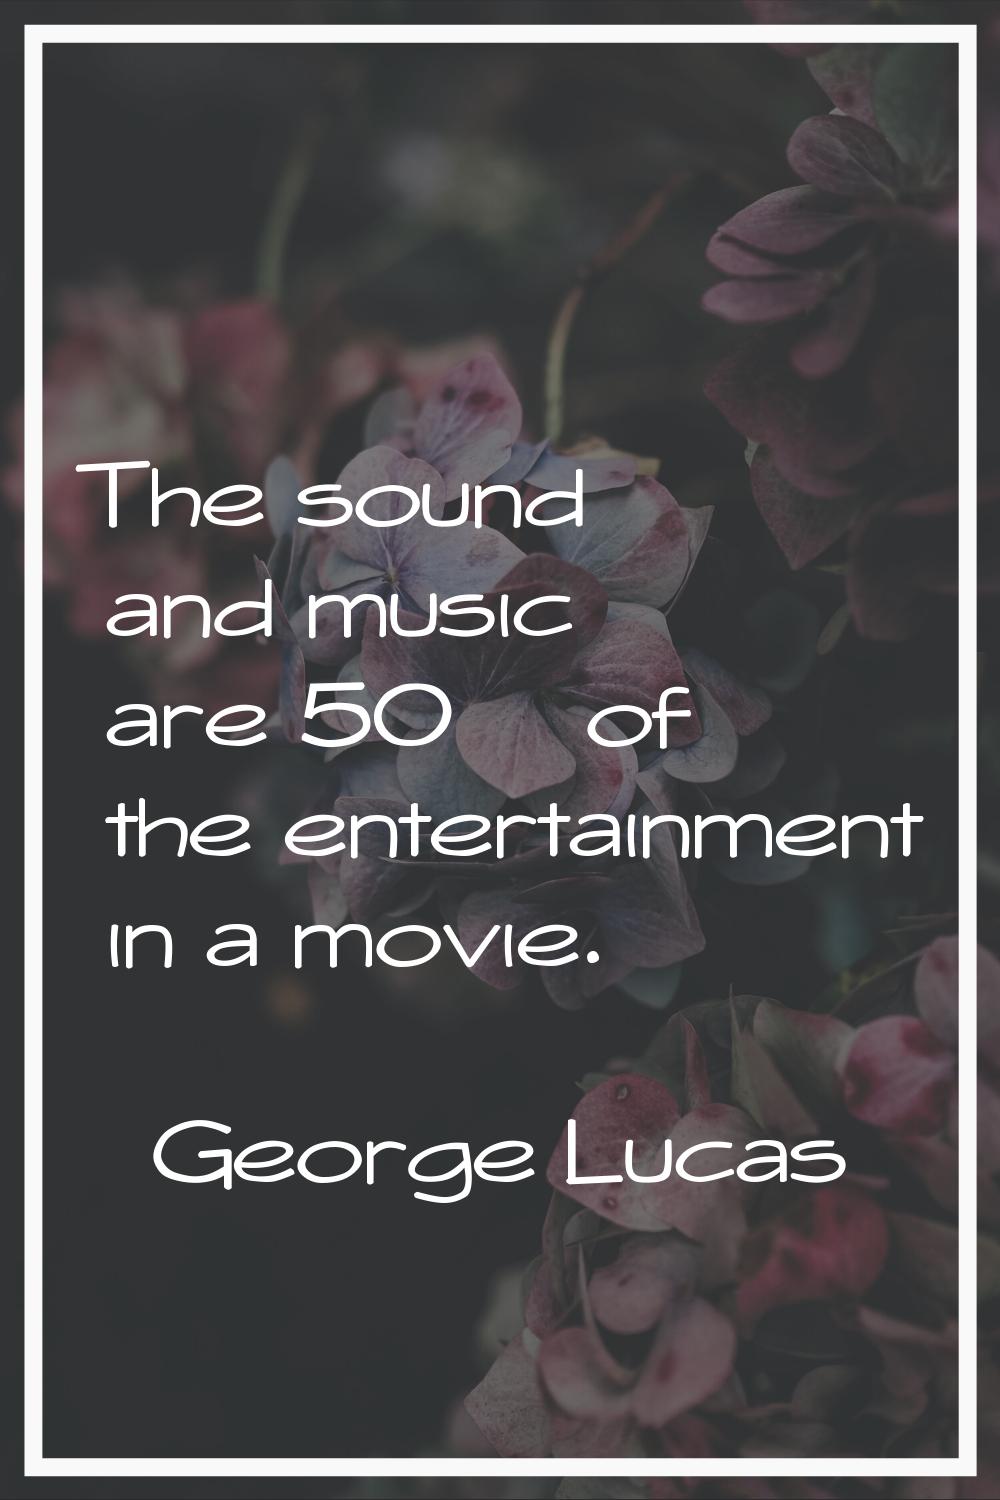 The sound and music are 50% of the entertainment in a movie.